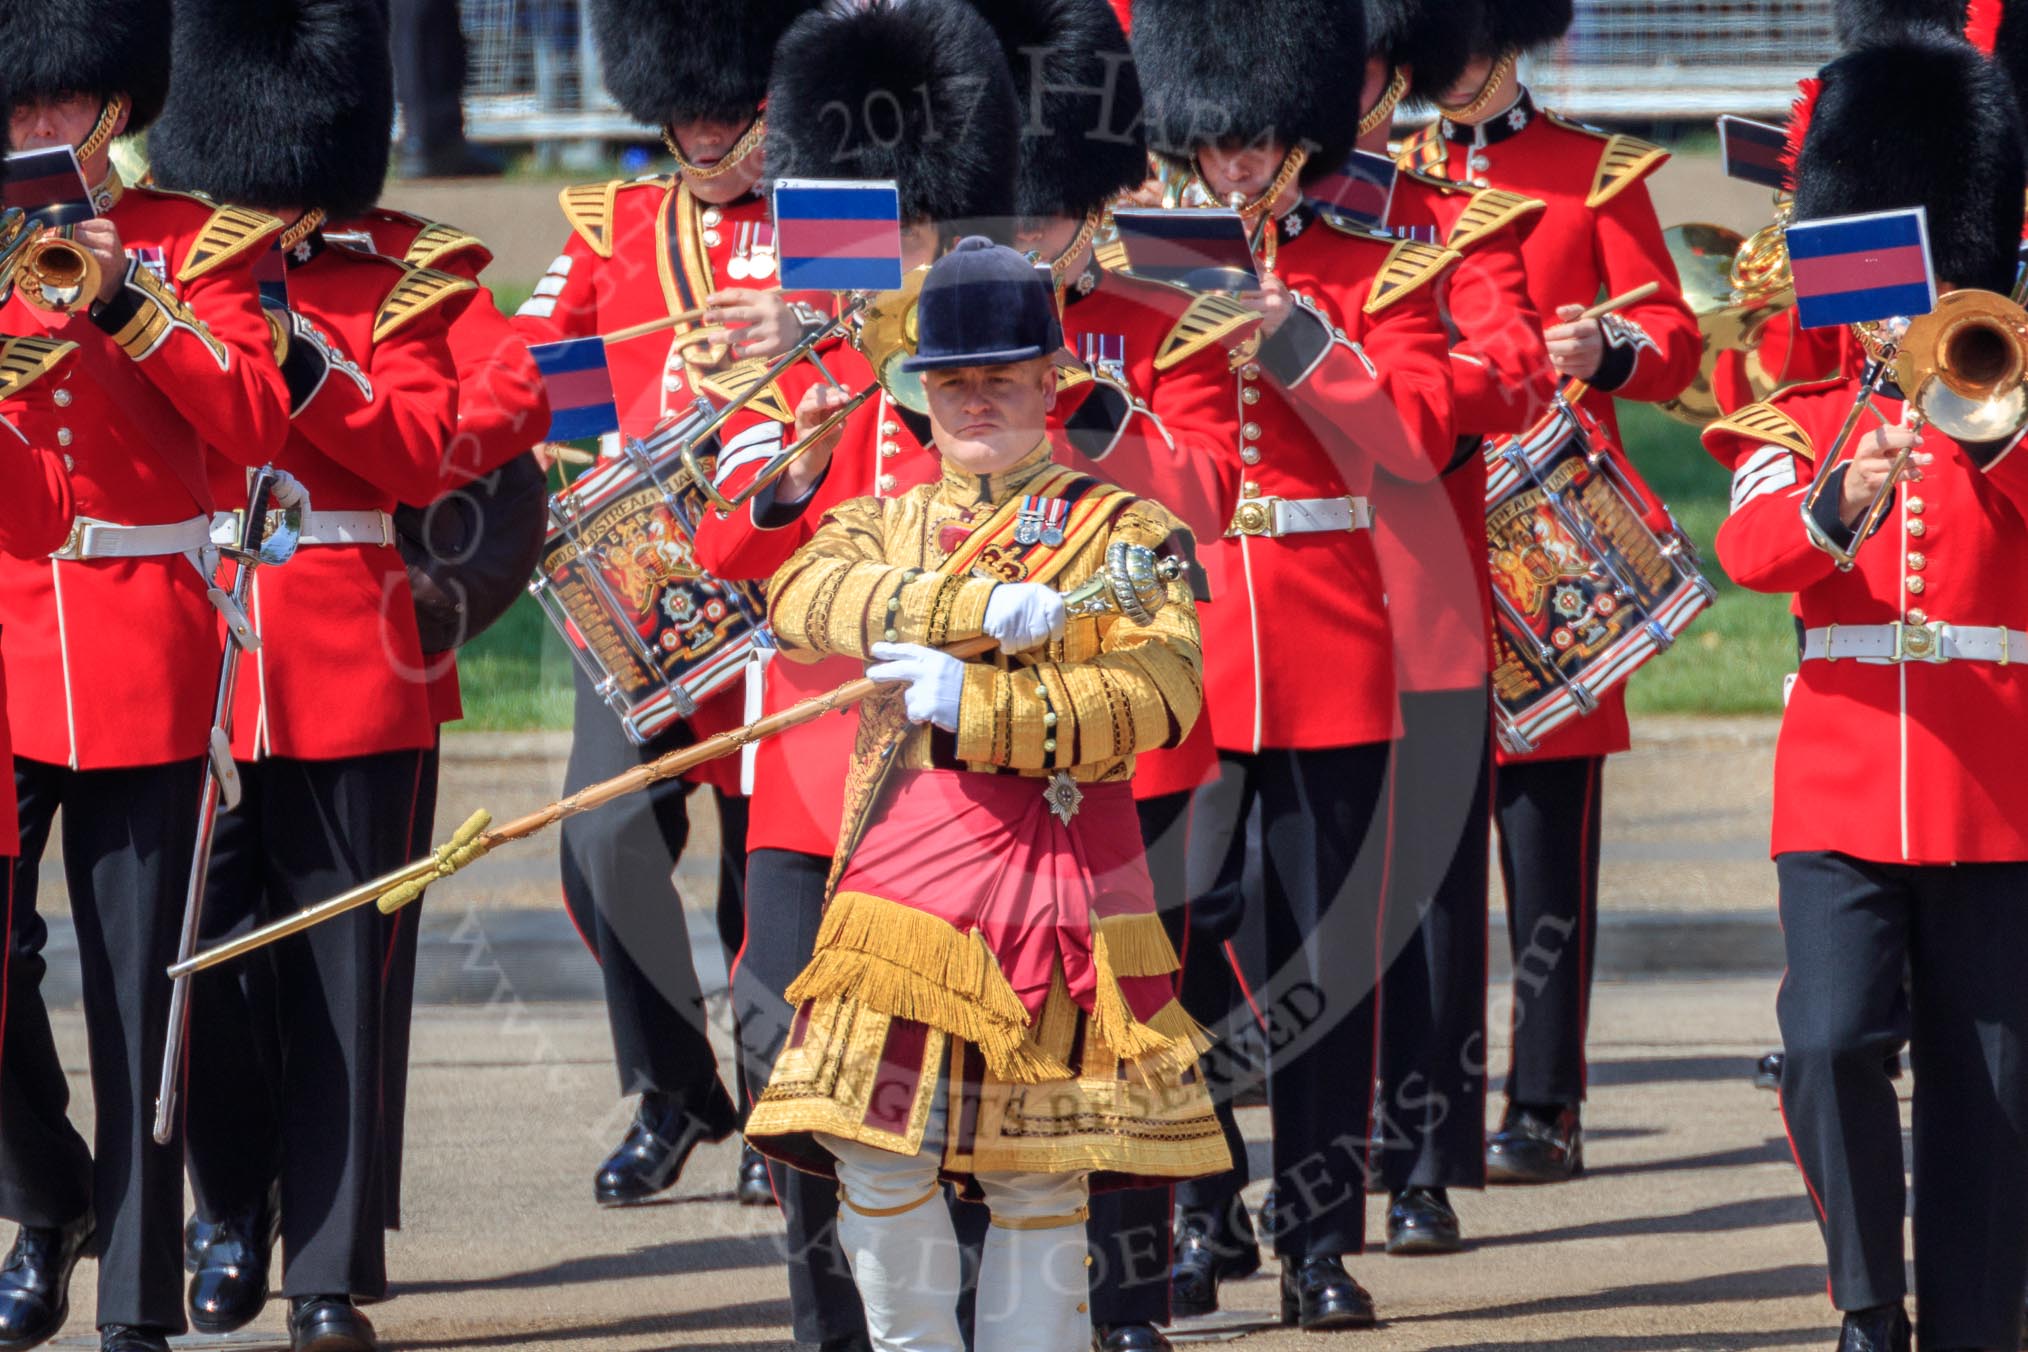 Drum Major Liam Rowley, 1st Battalion Coldstream Guards  leading the Band of the Coldstream Guards onto Horse Guards Parade during Trooping the Colour 2018, The Queen's Birthday Parade at Horse Guards Parade, Westminster, London, 9 June 2018, 10:32.